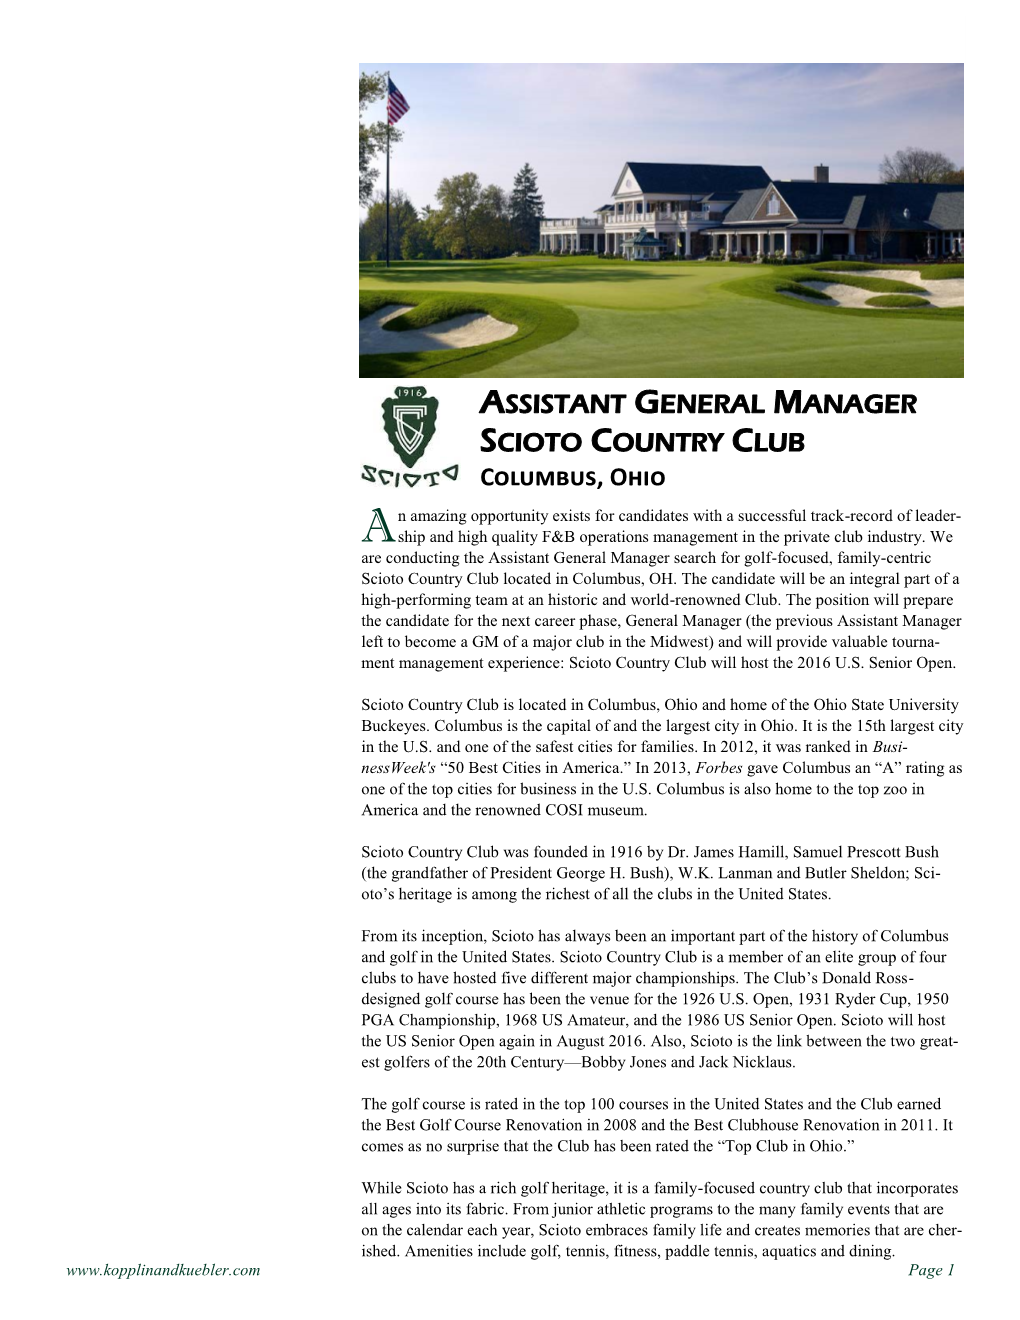 Assistant General Manager Scioto Country Club